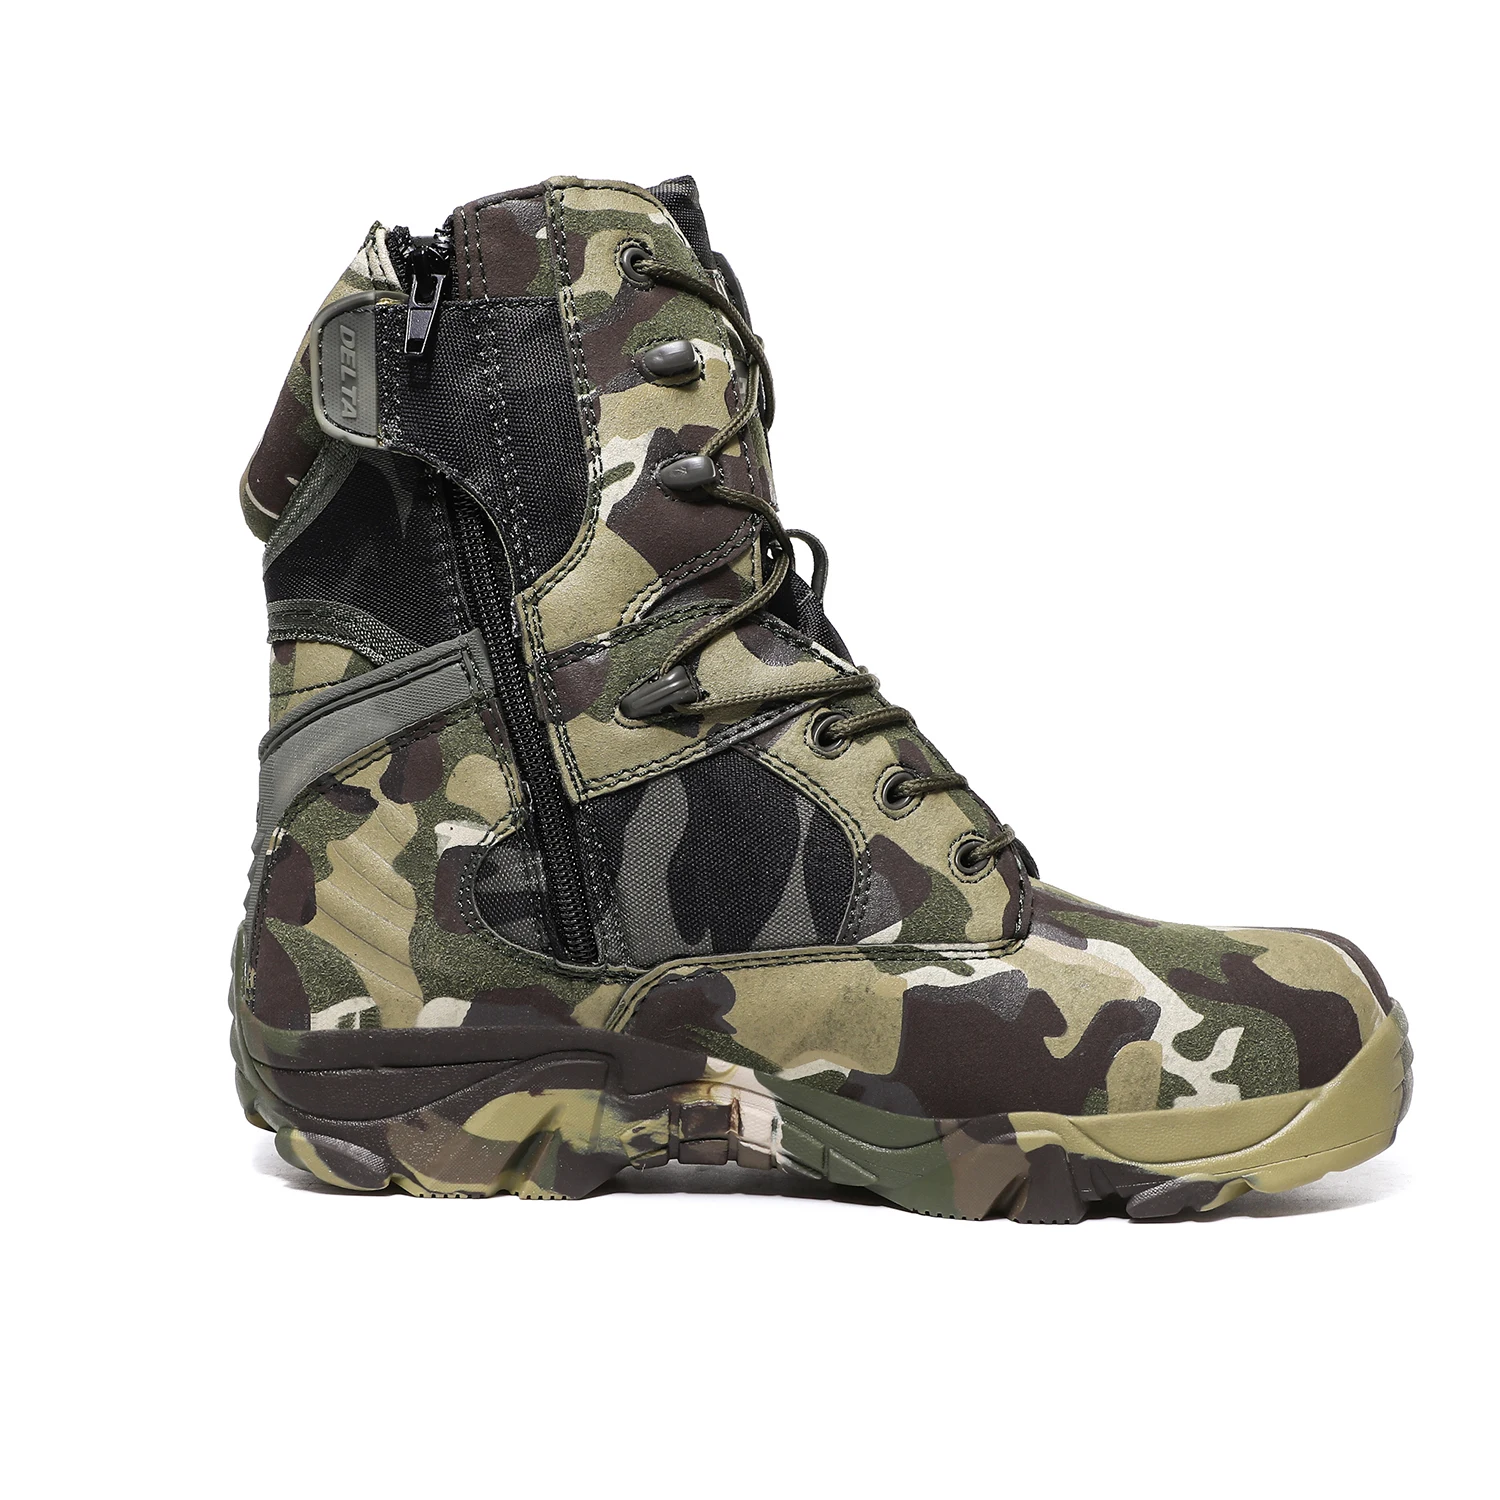 Winter Outdoor Men Hiking Shoes Breathable Tactical Combat Army Boot Desert Training Sneaker Size 39-47 Anti-Slip Trekking Shoes